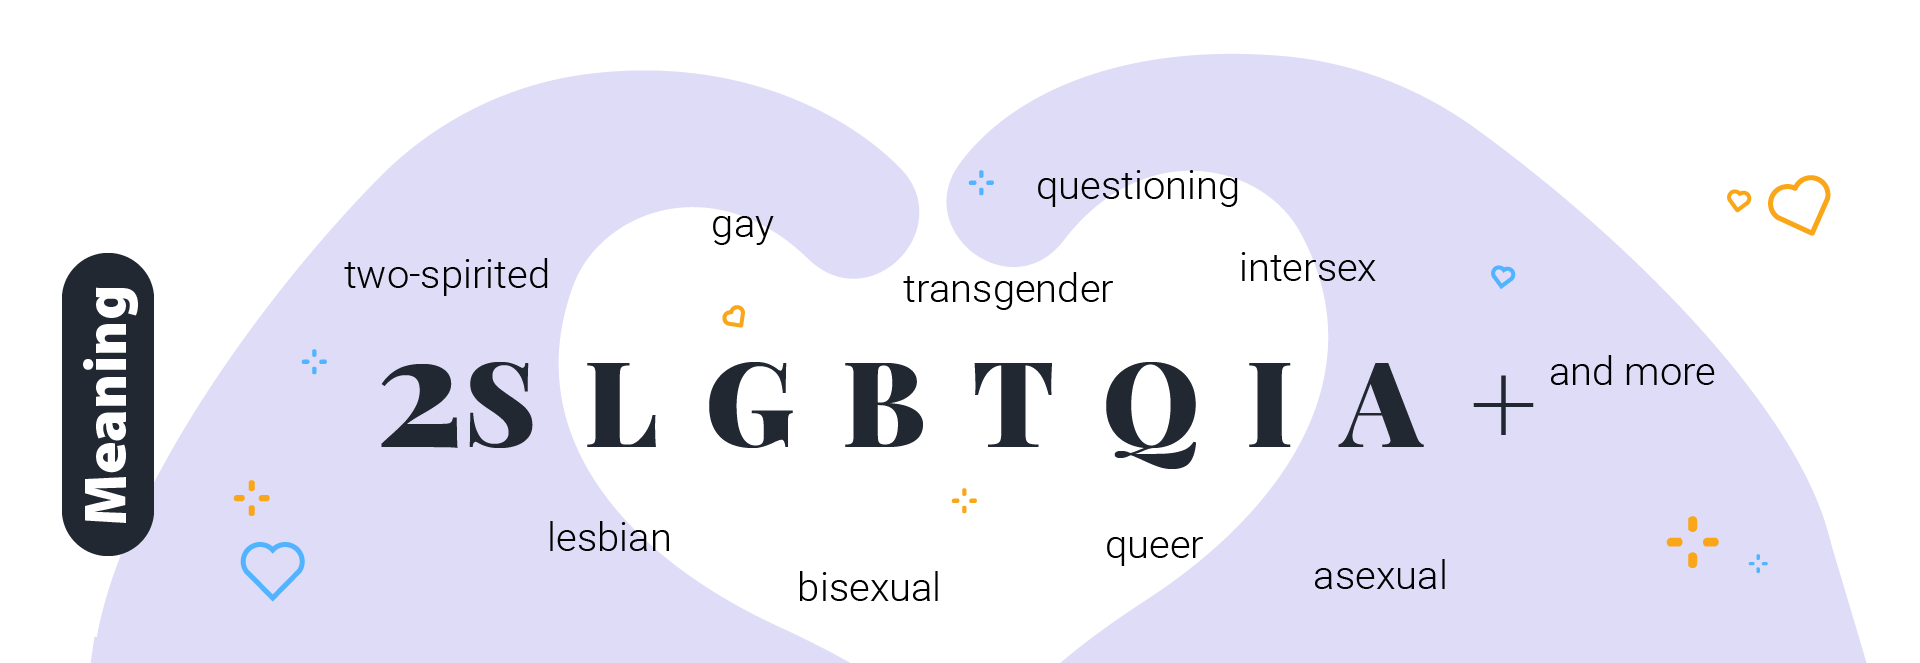 Infographic with the 2SLGBTQIA+ acronym's definitions